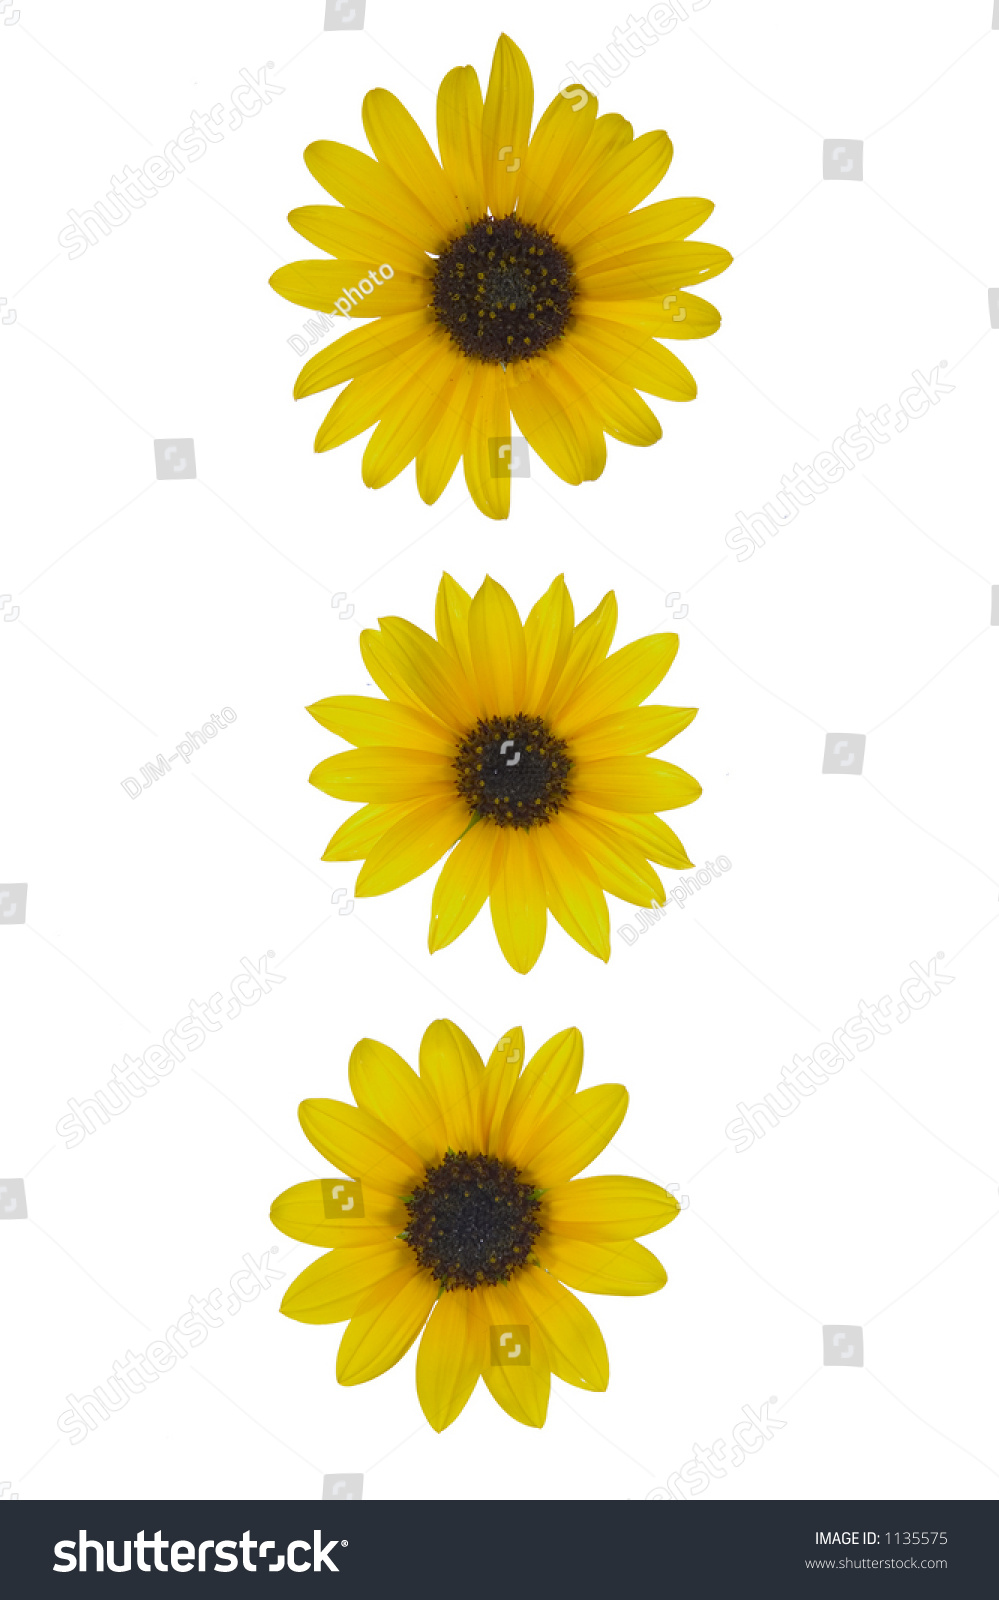 Symbol Created From Arranging Flowers On A Pure White Background. Stock